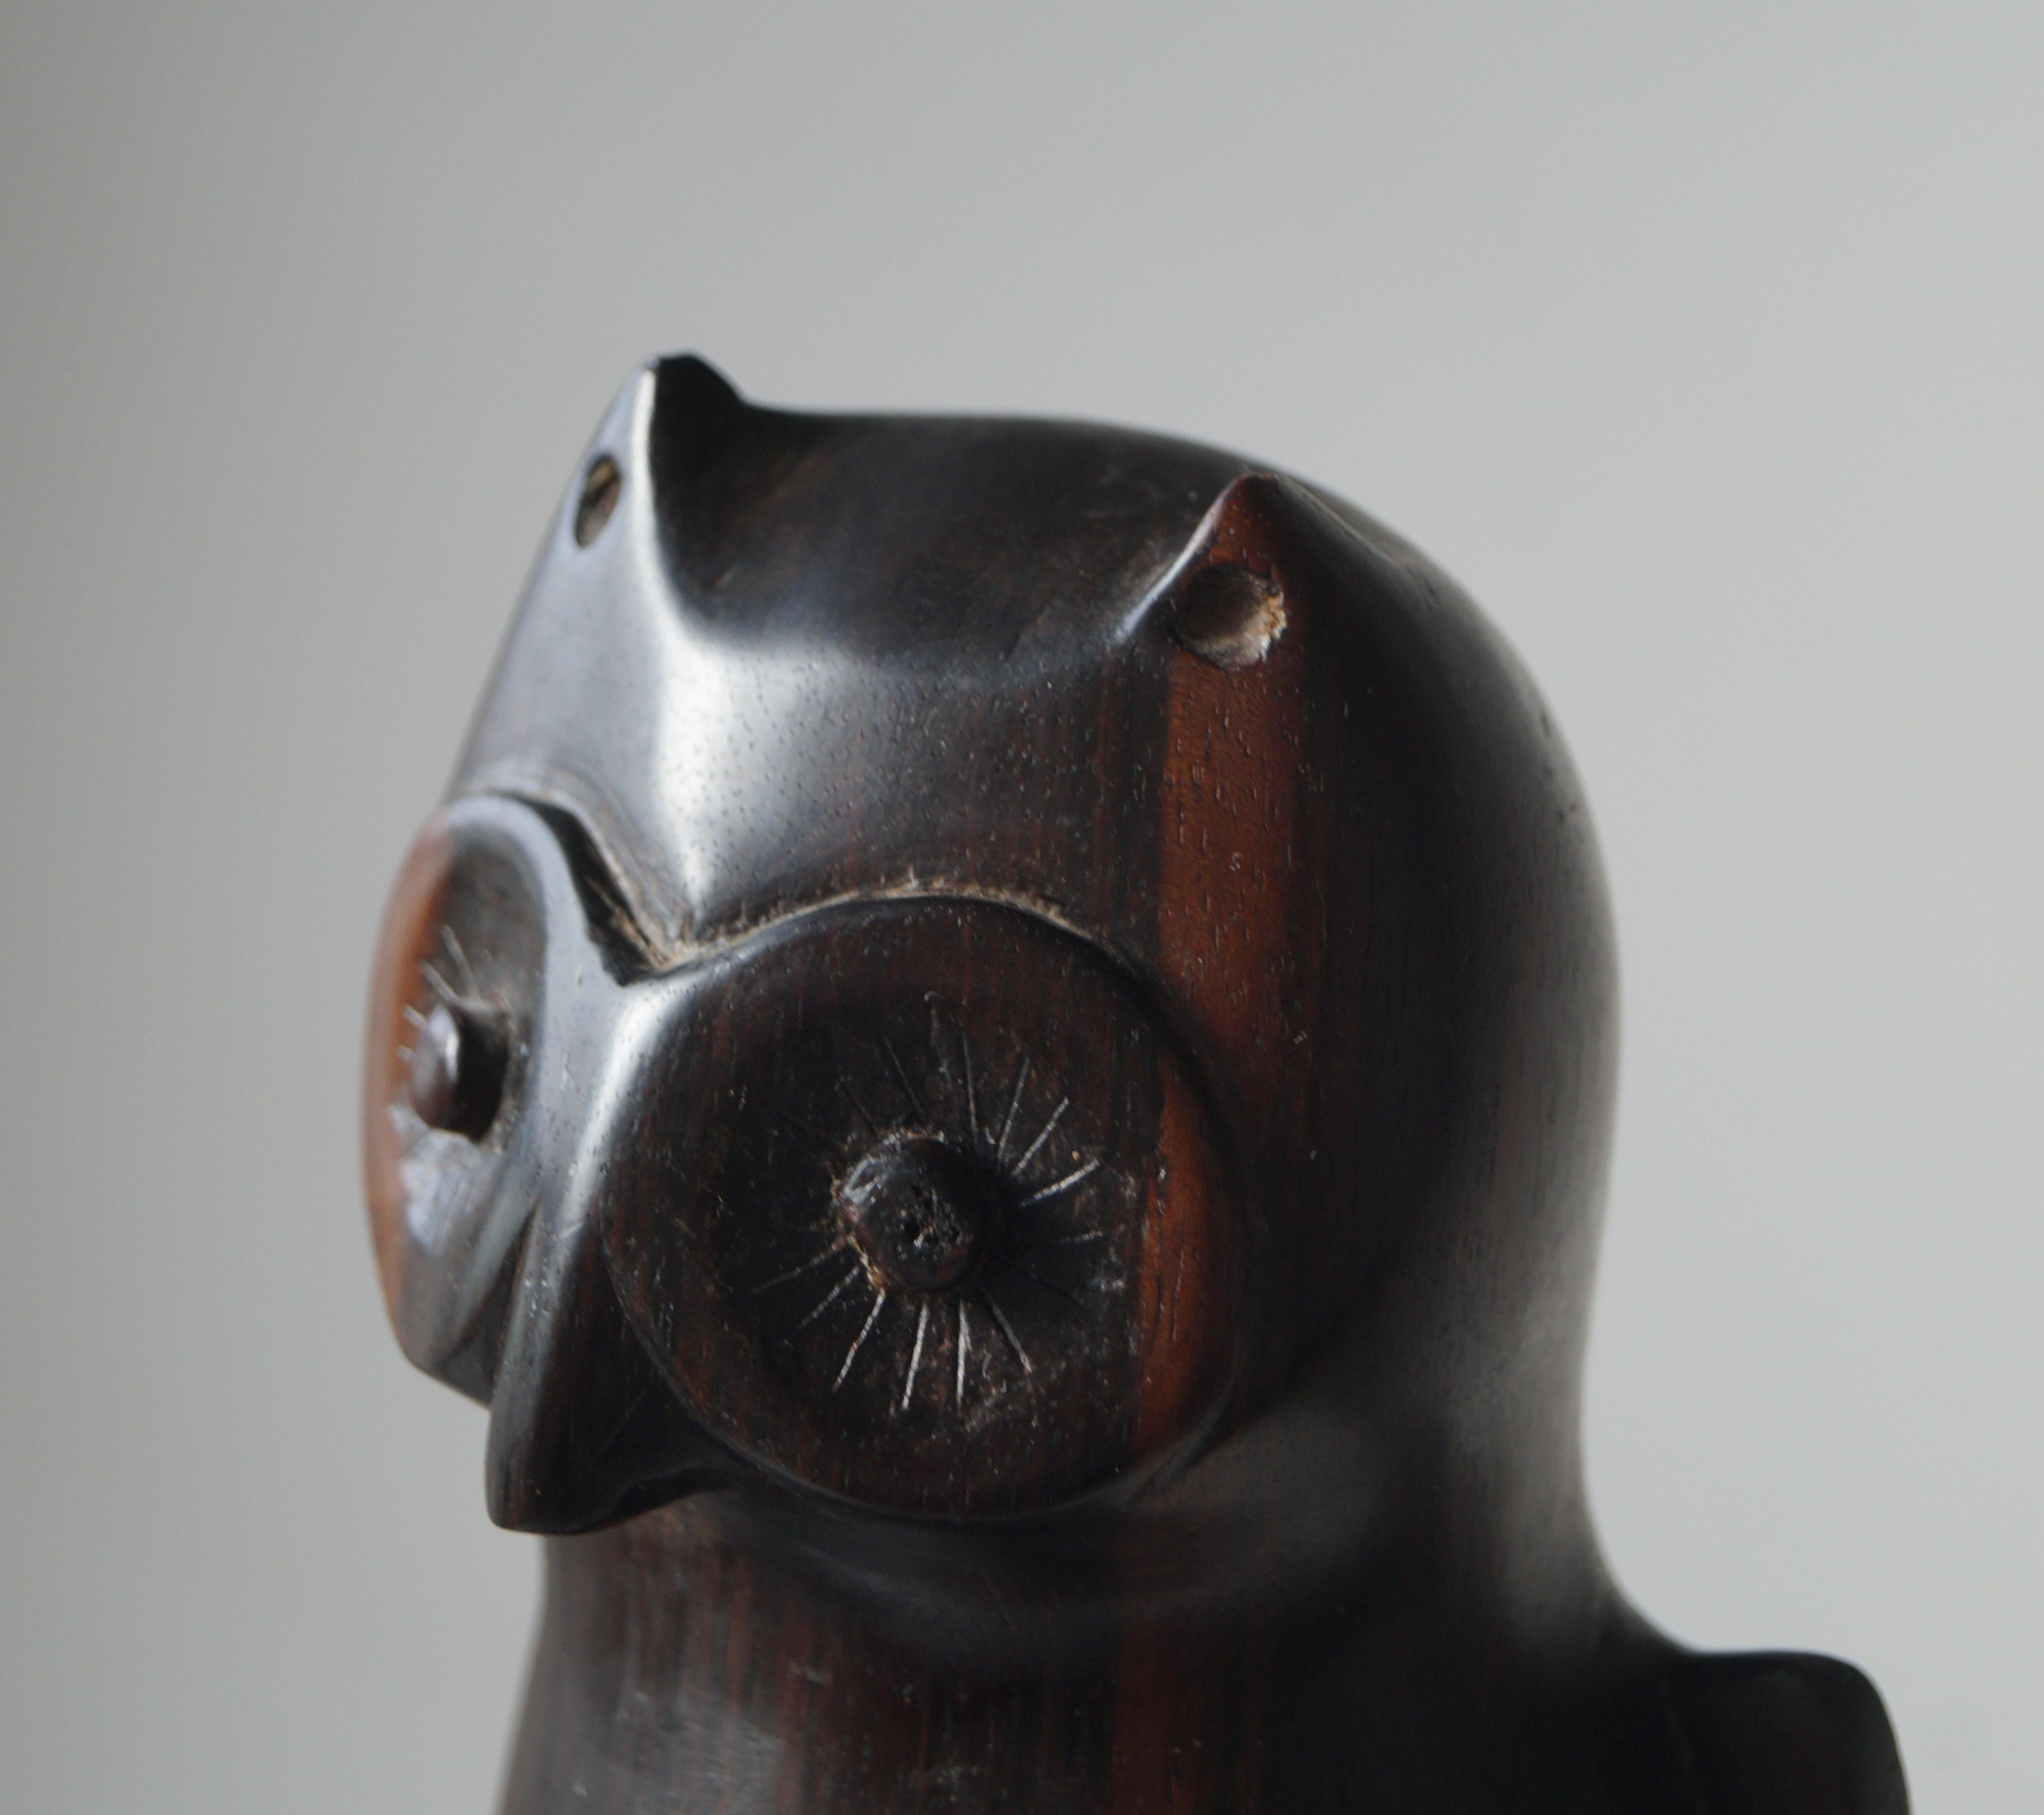 A solid macassar ebony wooden sculpture of an owl. It is clear to see that this owl was made by a skilled artist with an eye for aesthetics, proportions and the ability to bring a sculpture to life. With its slightly tilted, inquisitve and curious